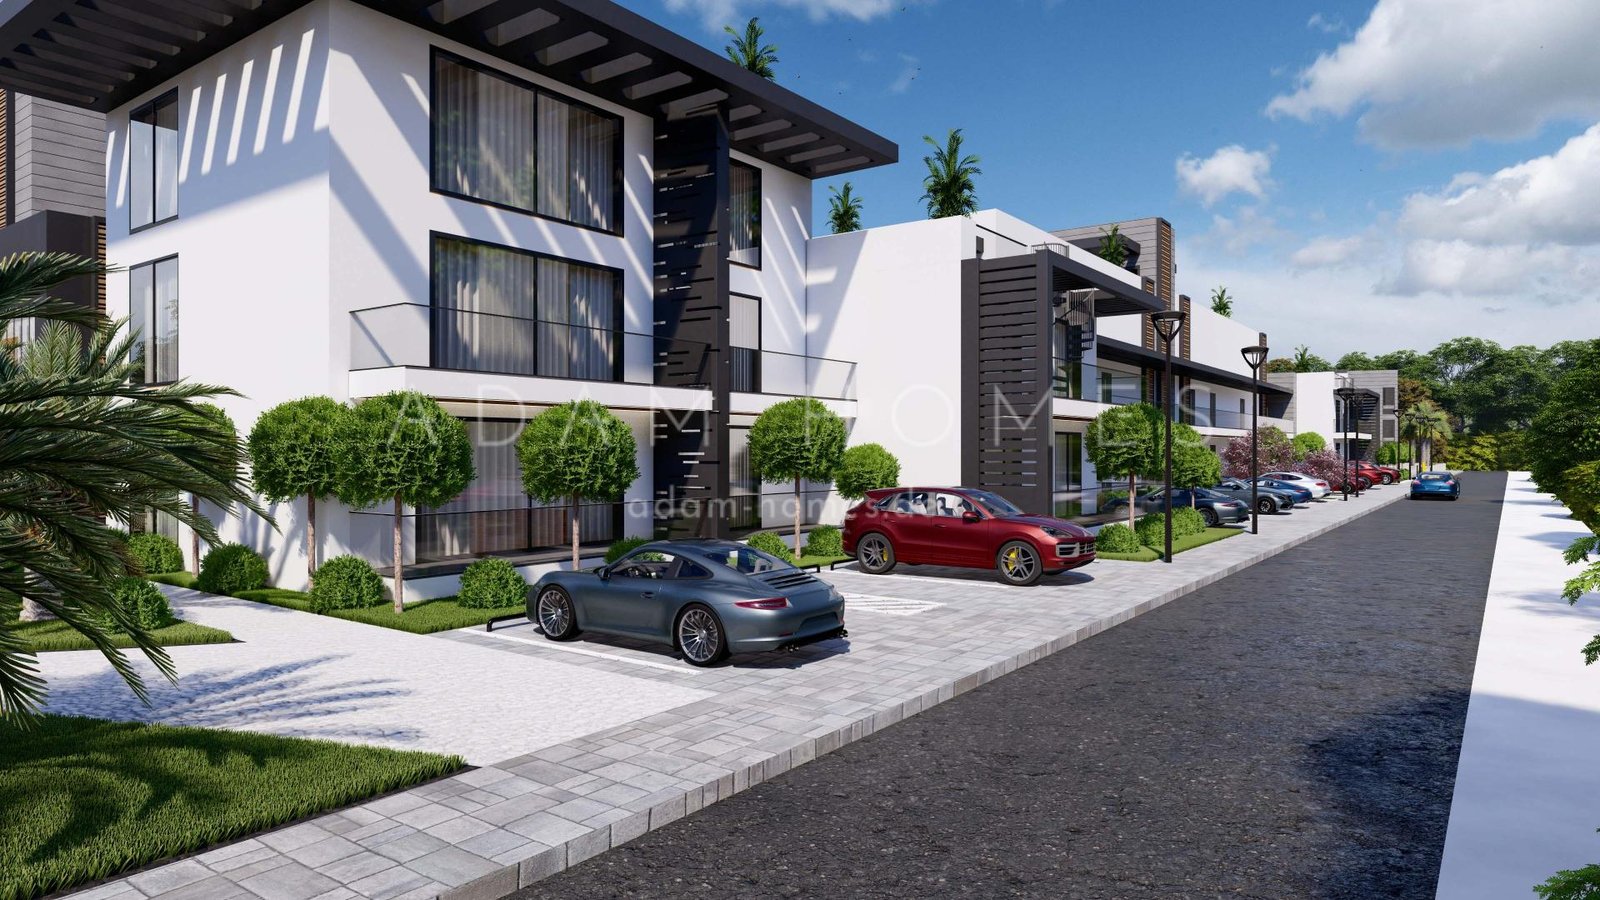 1 bedrooms duplex apartments in a profitable district of Iskele